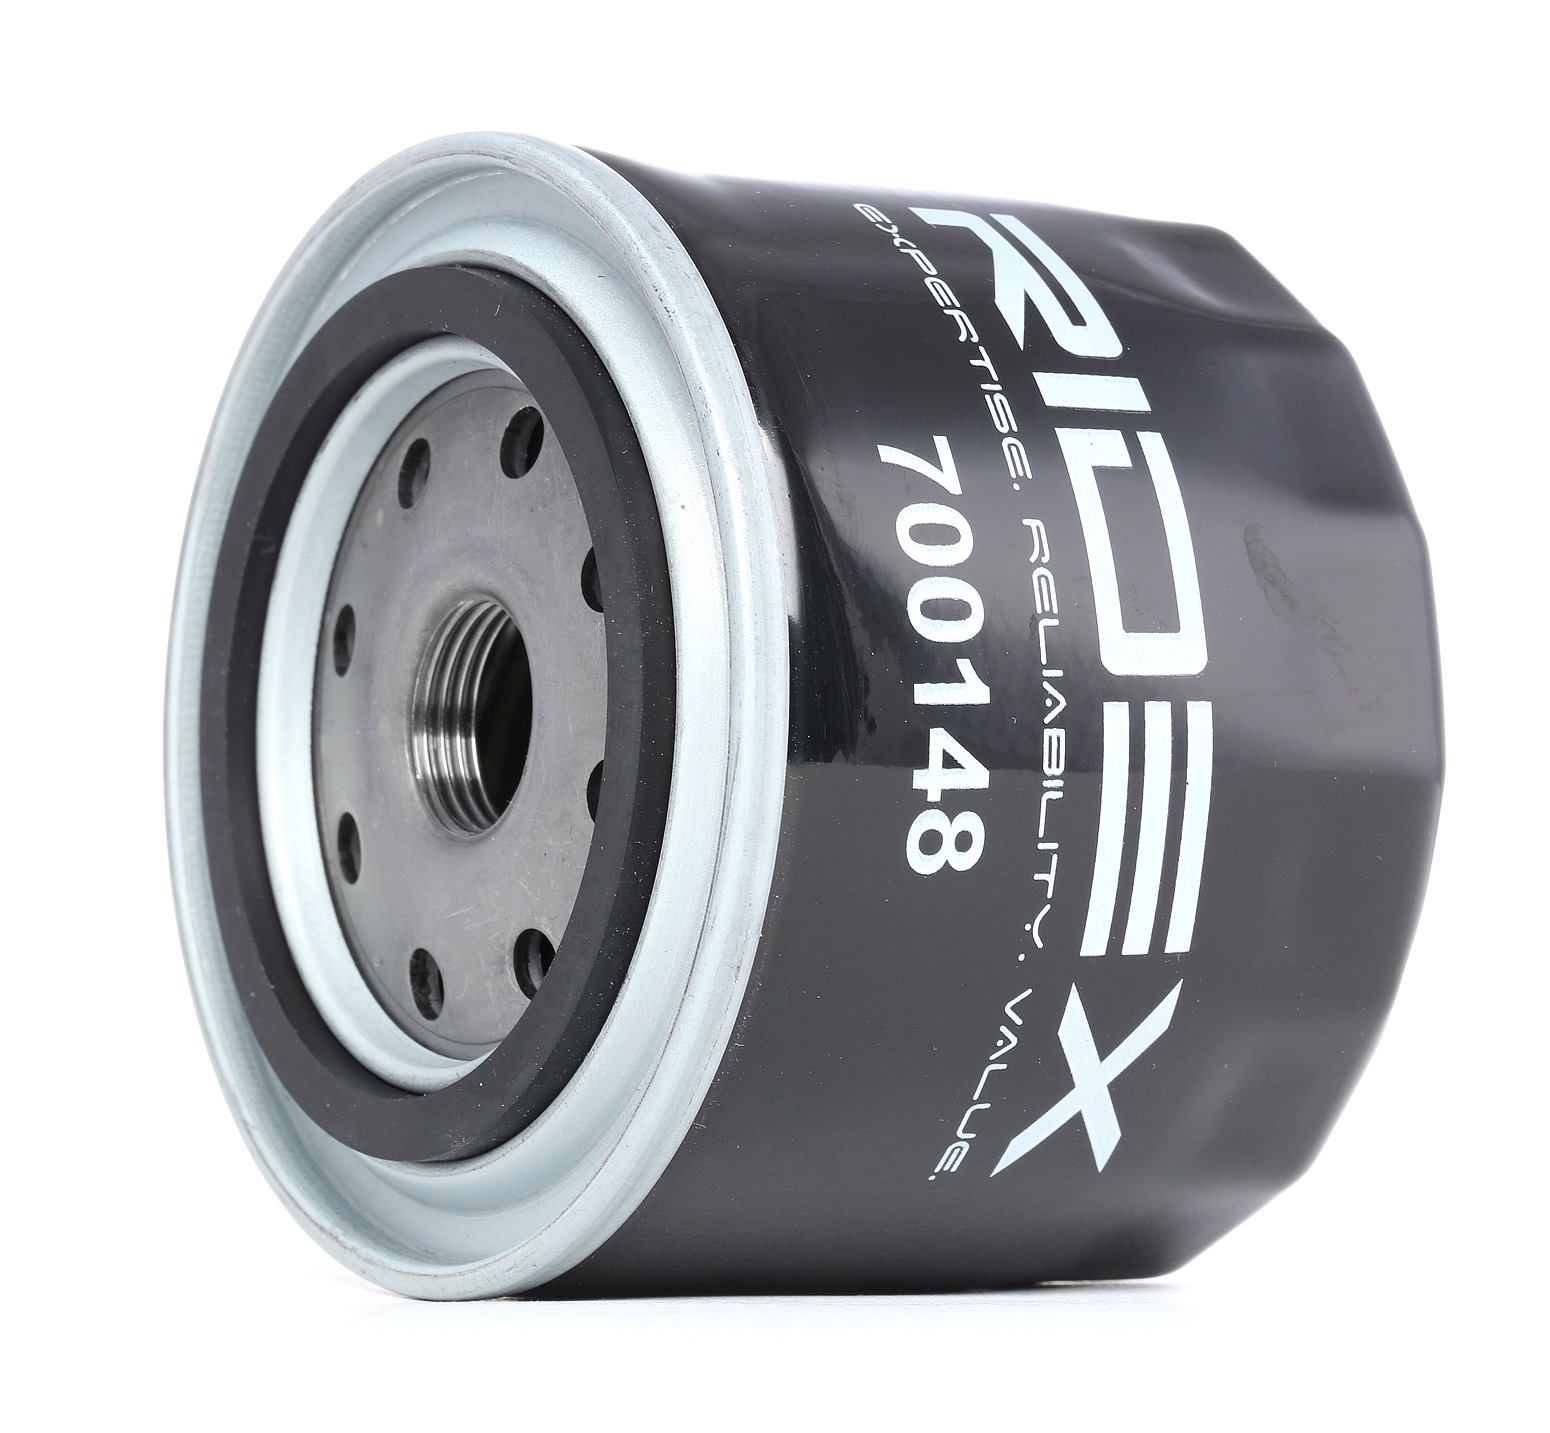 7O0148 RIDEX Oil filters VOLVO M 20 X 1.5, with one anti-return valve, Spin-on Filter